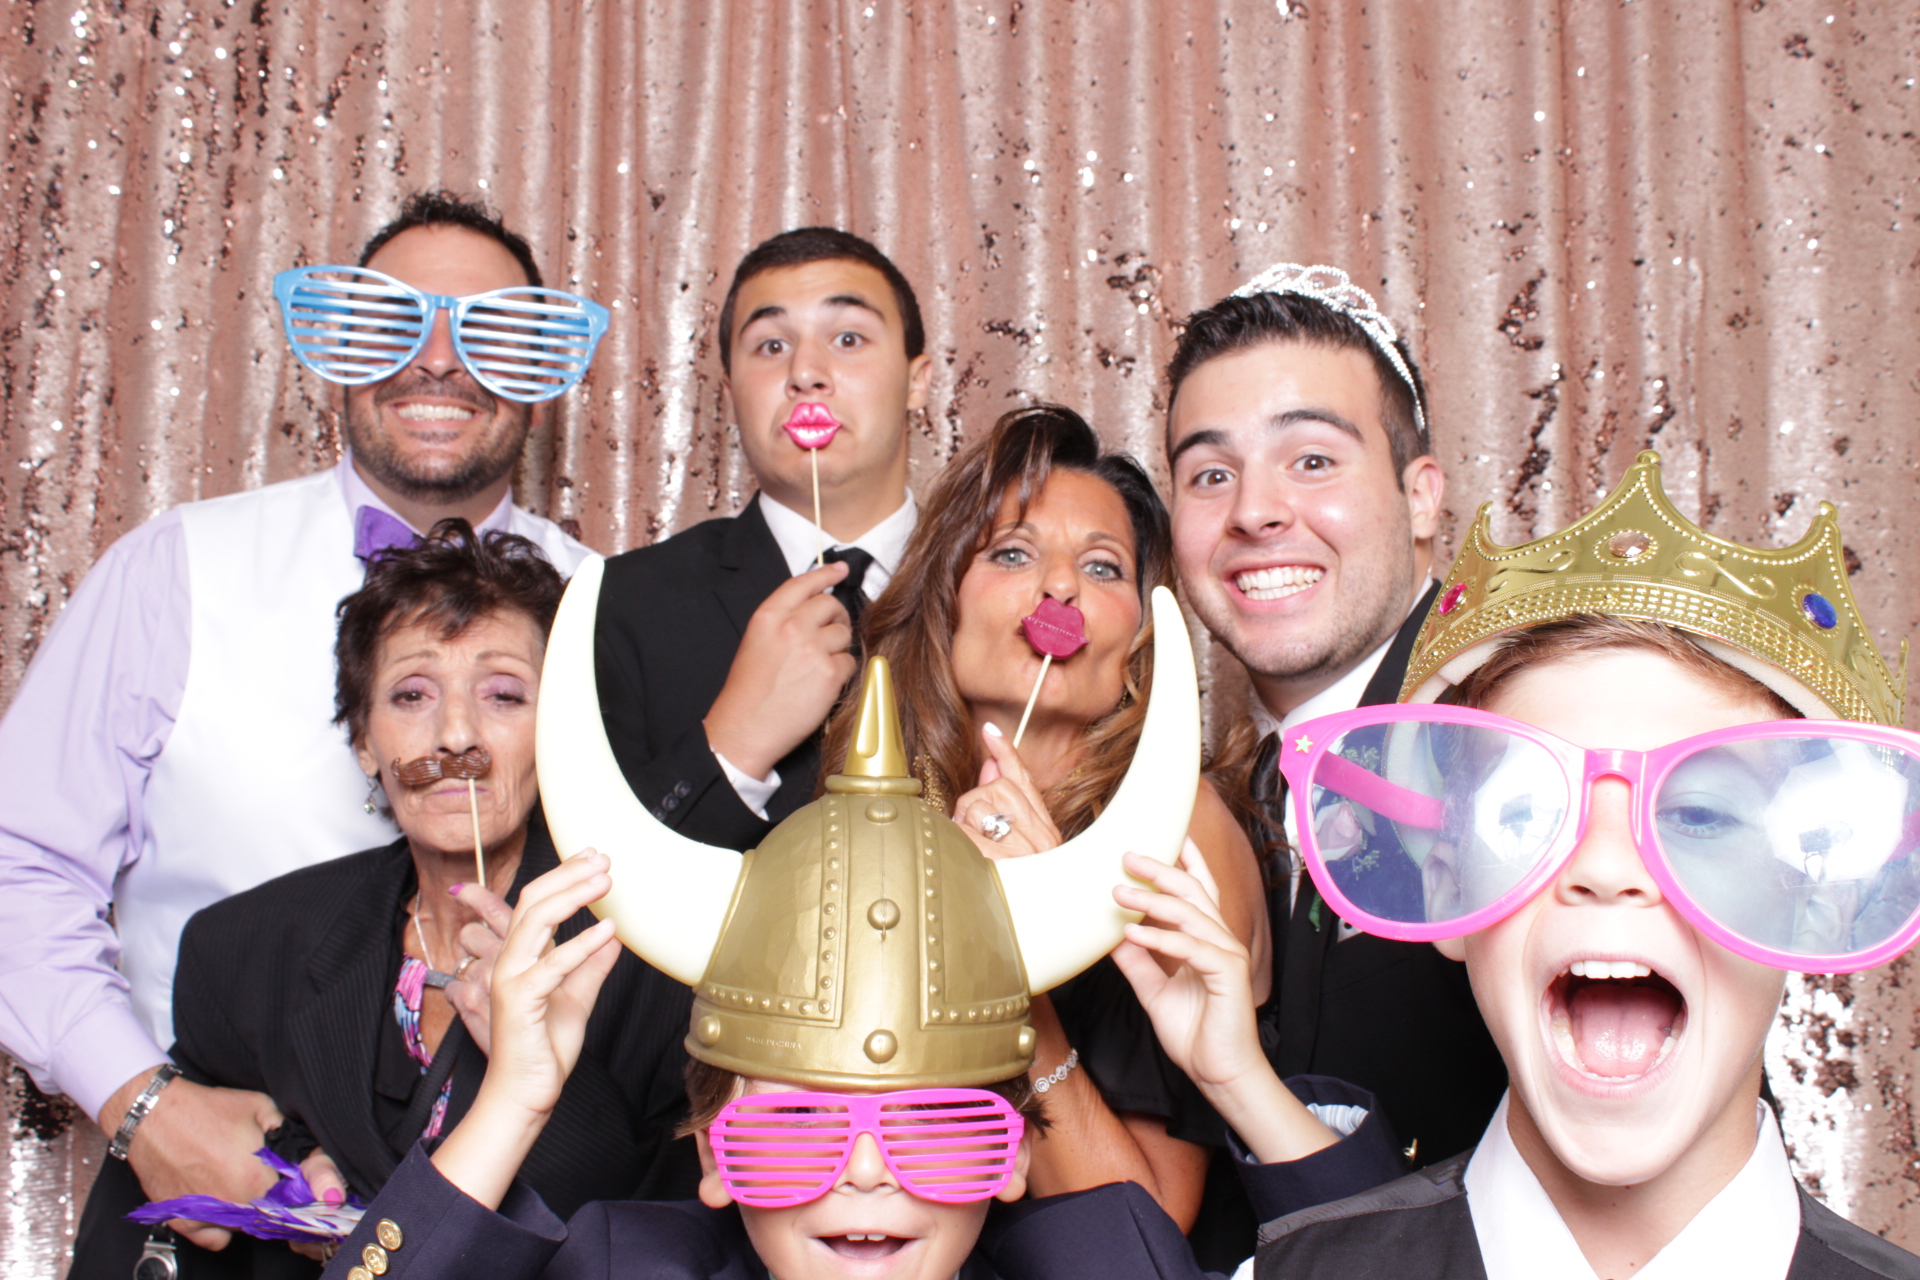 open-air-photo-booth-wedding-party-event-alicia-steve-5